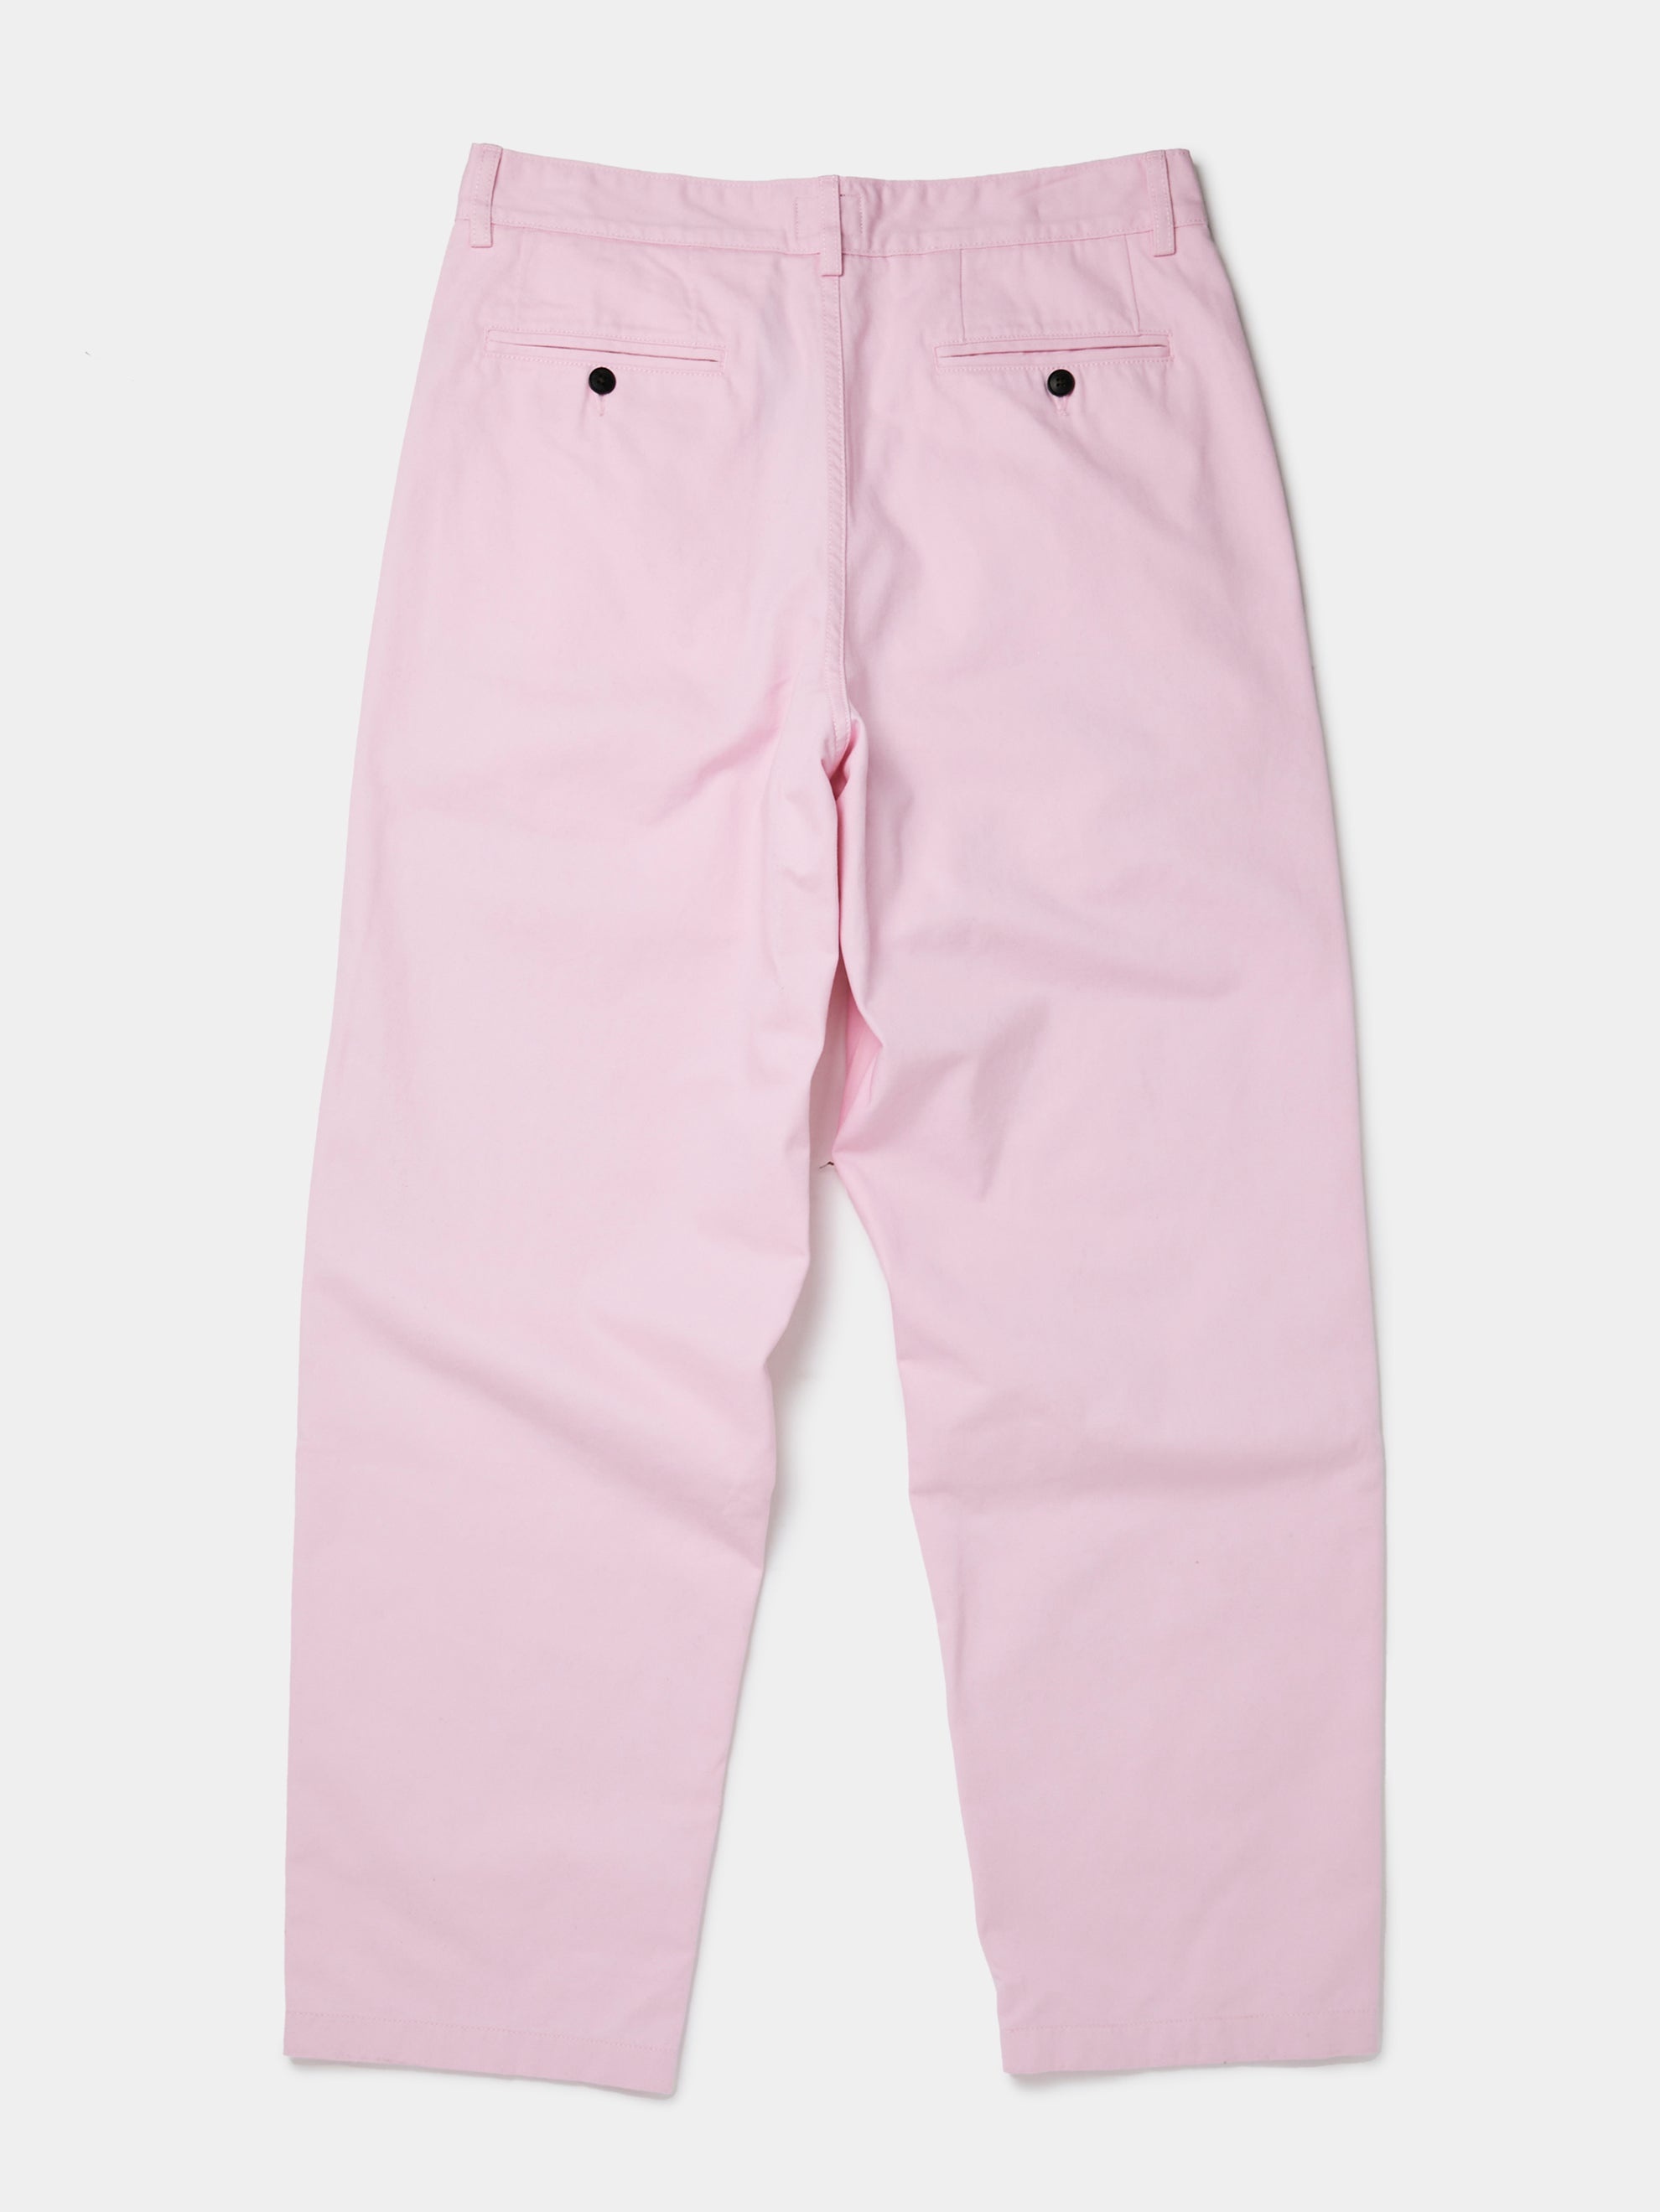 TWILL DOUBLE-PLEAT PANTS (PINK) - 7